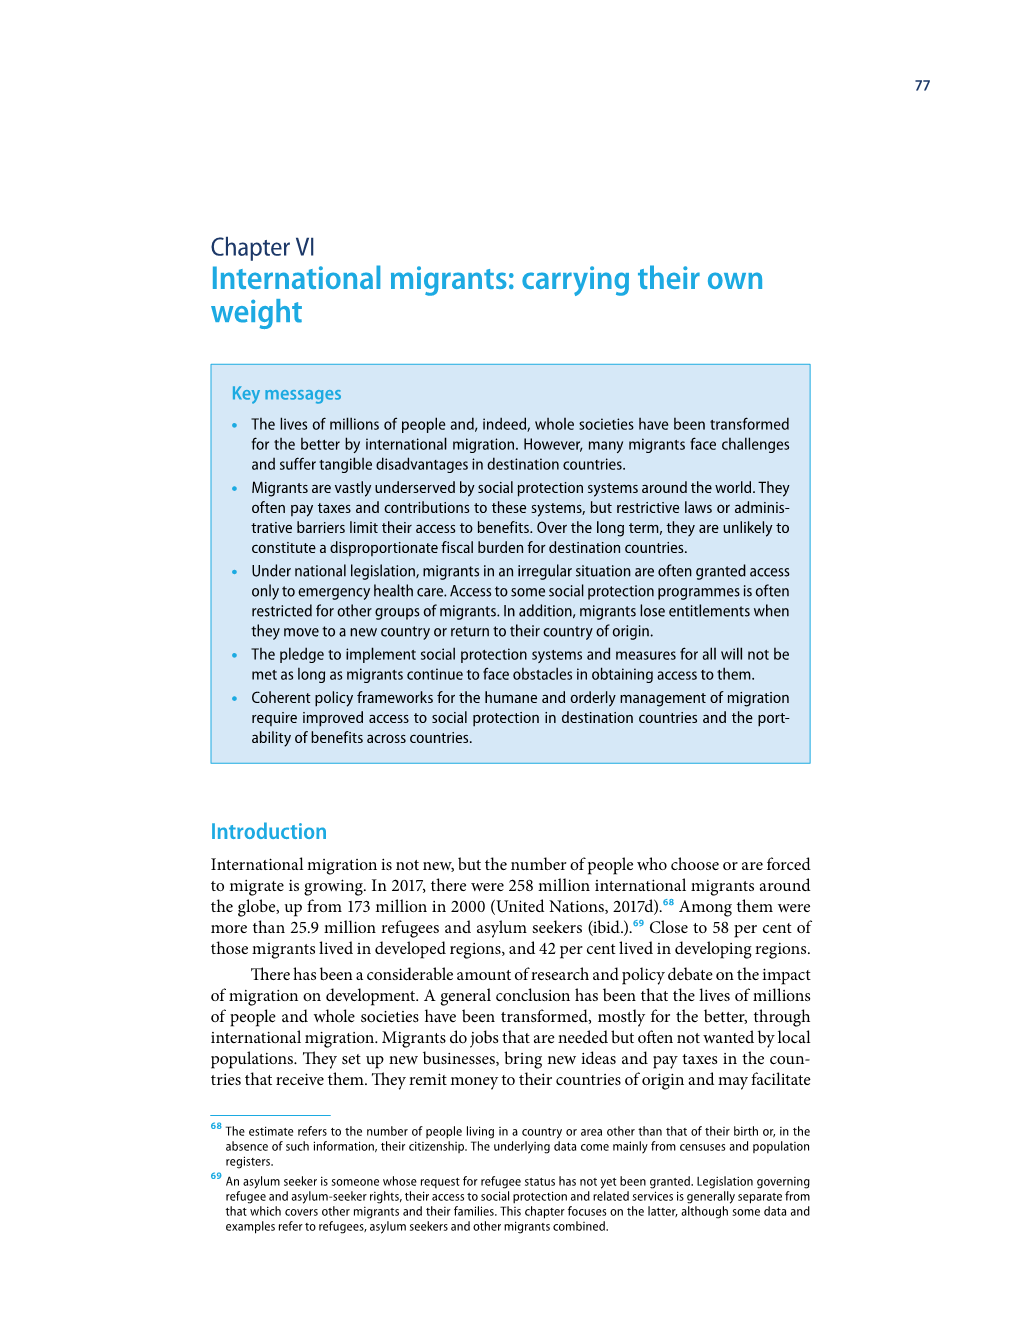 Chapter VI: International Migrants: Carrying Their Own Weight